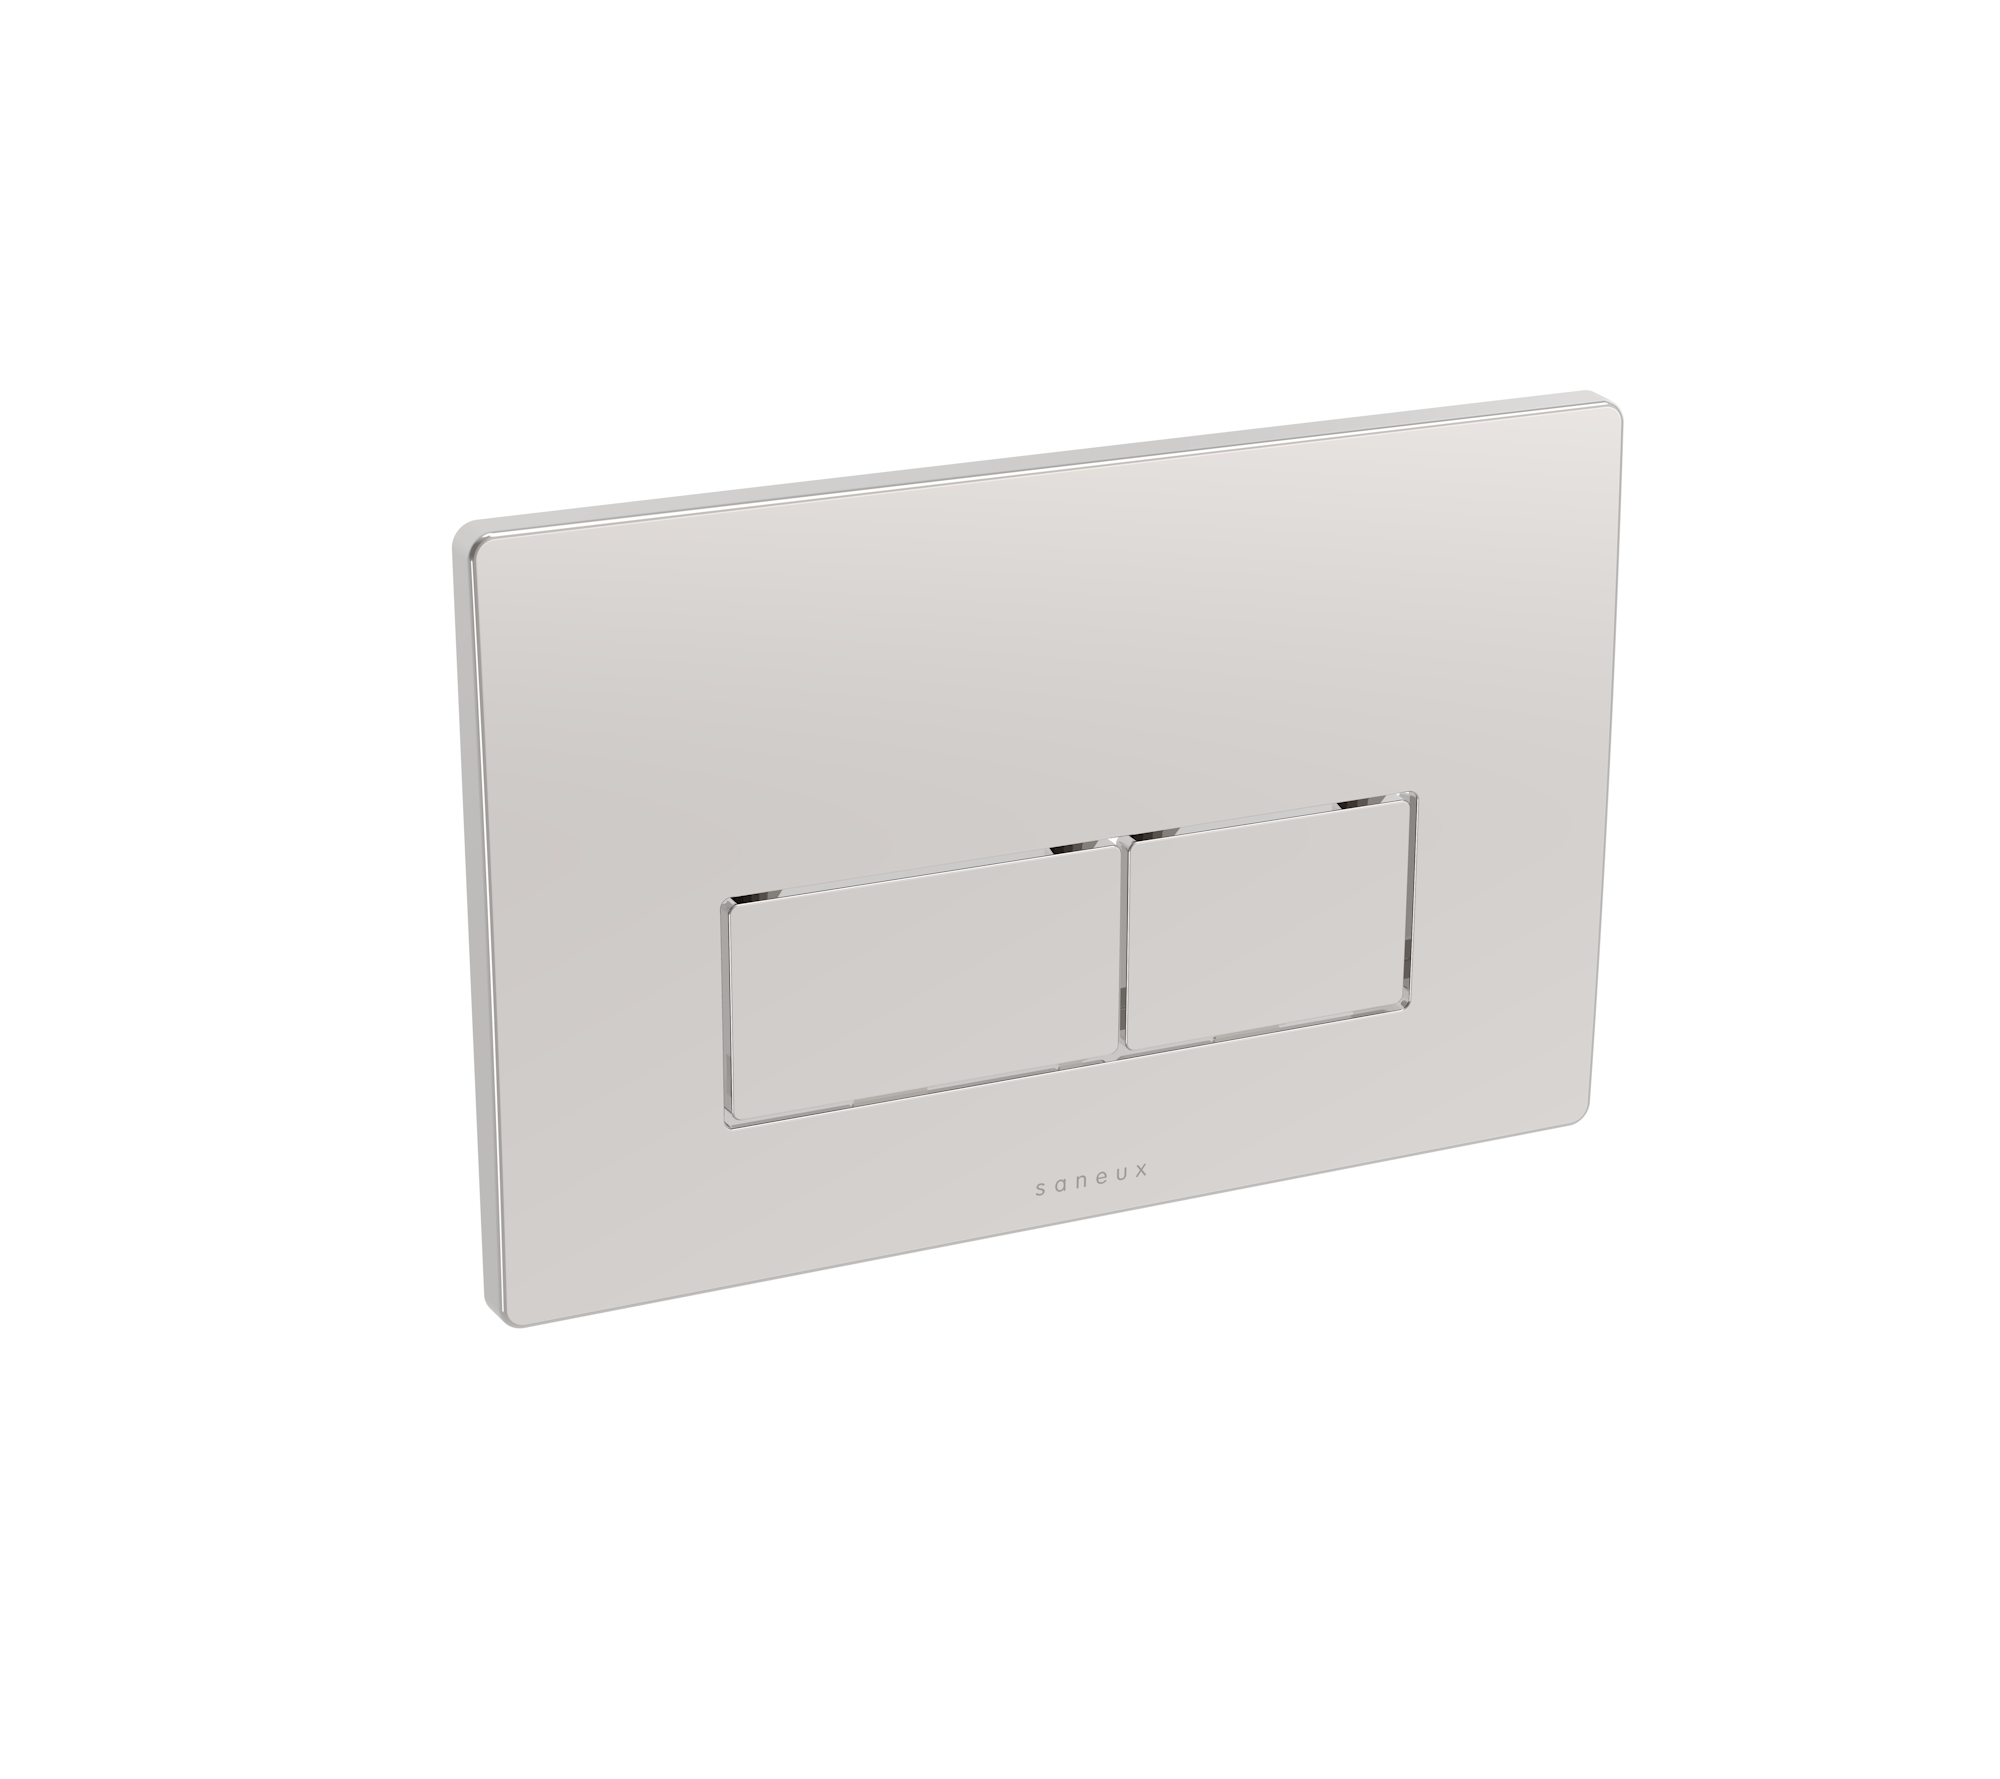 FLUSHE 2.0 square flush plate - Polished Stainless Steel